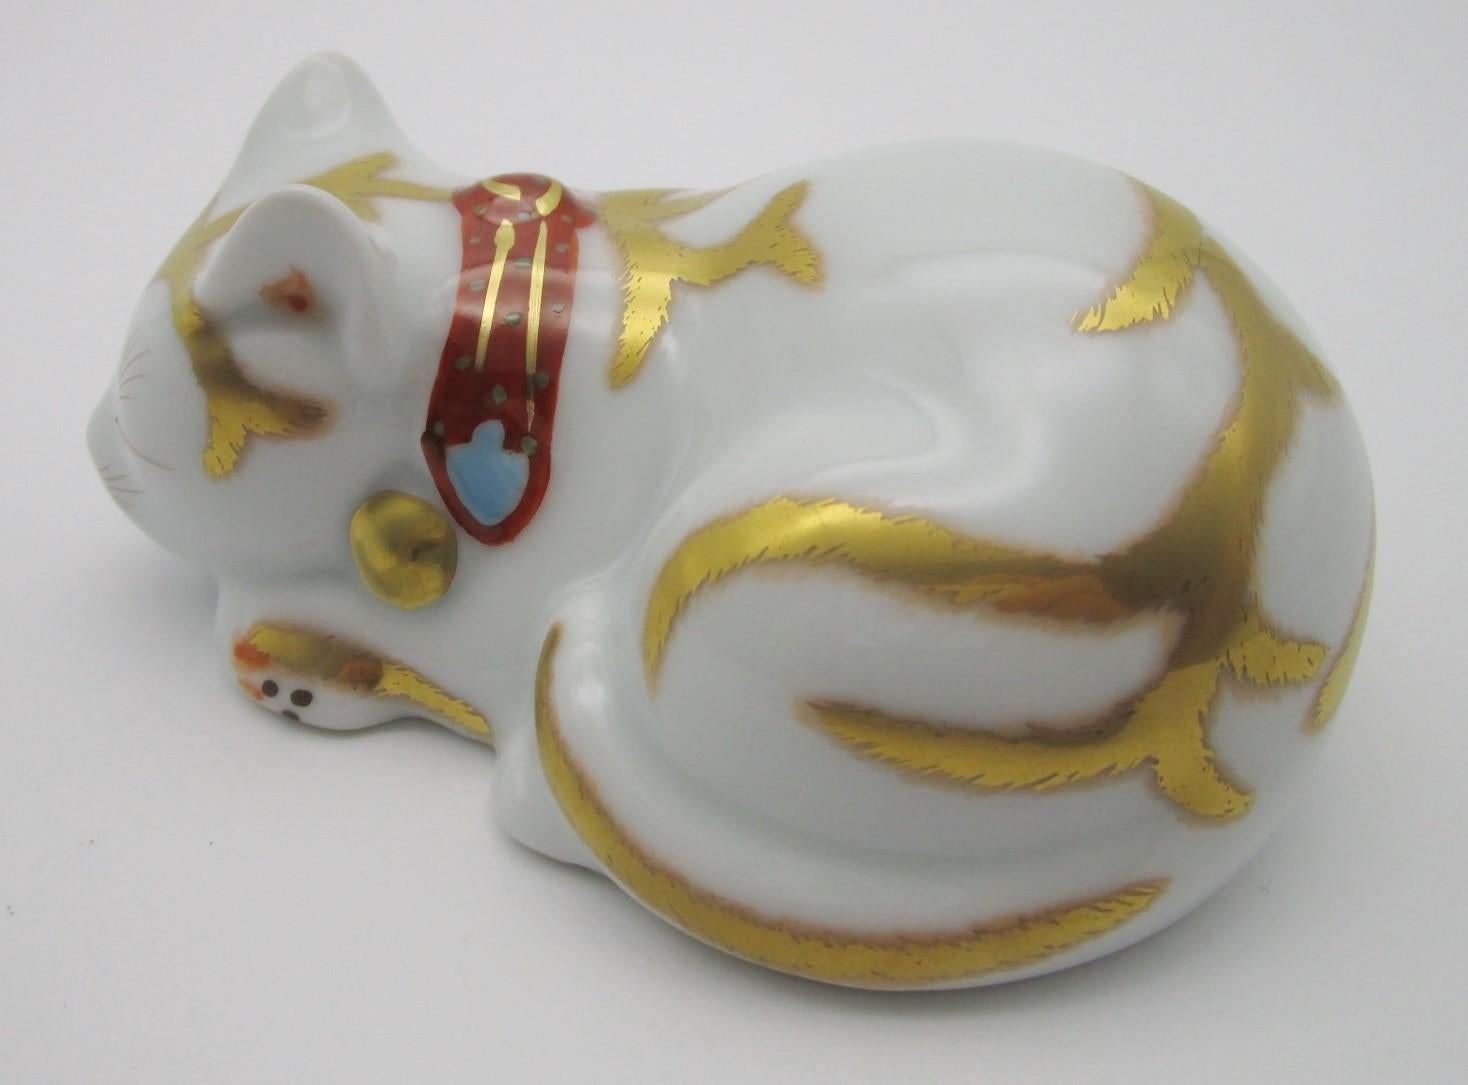 Charming contemporary Japanese Imari sleeping cat in fine pure white porcelain with generous gold details, is inspired by the small wooden sculpture at the entrance of Toshougu shrine in Nikko, Japan, by the acclaimed sculpture artist and architect